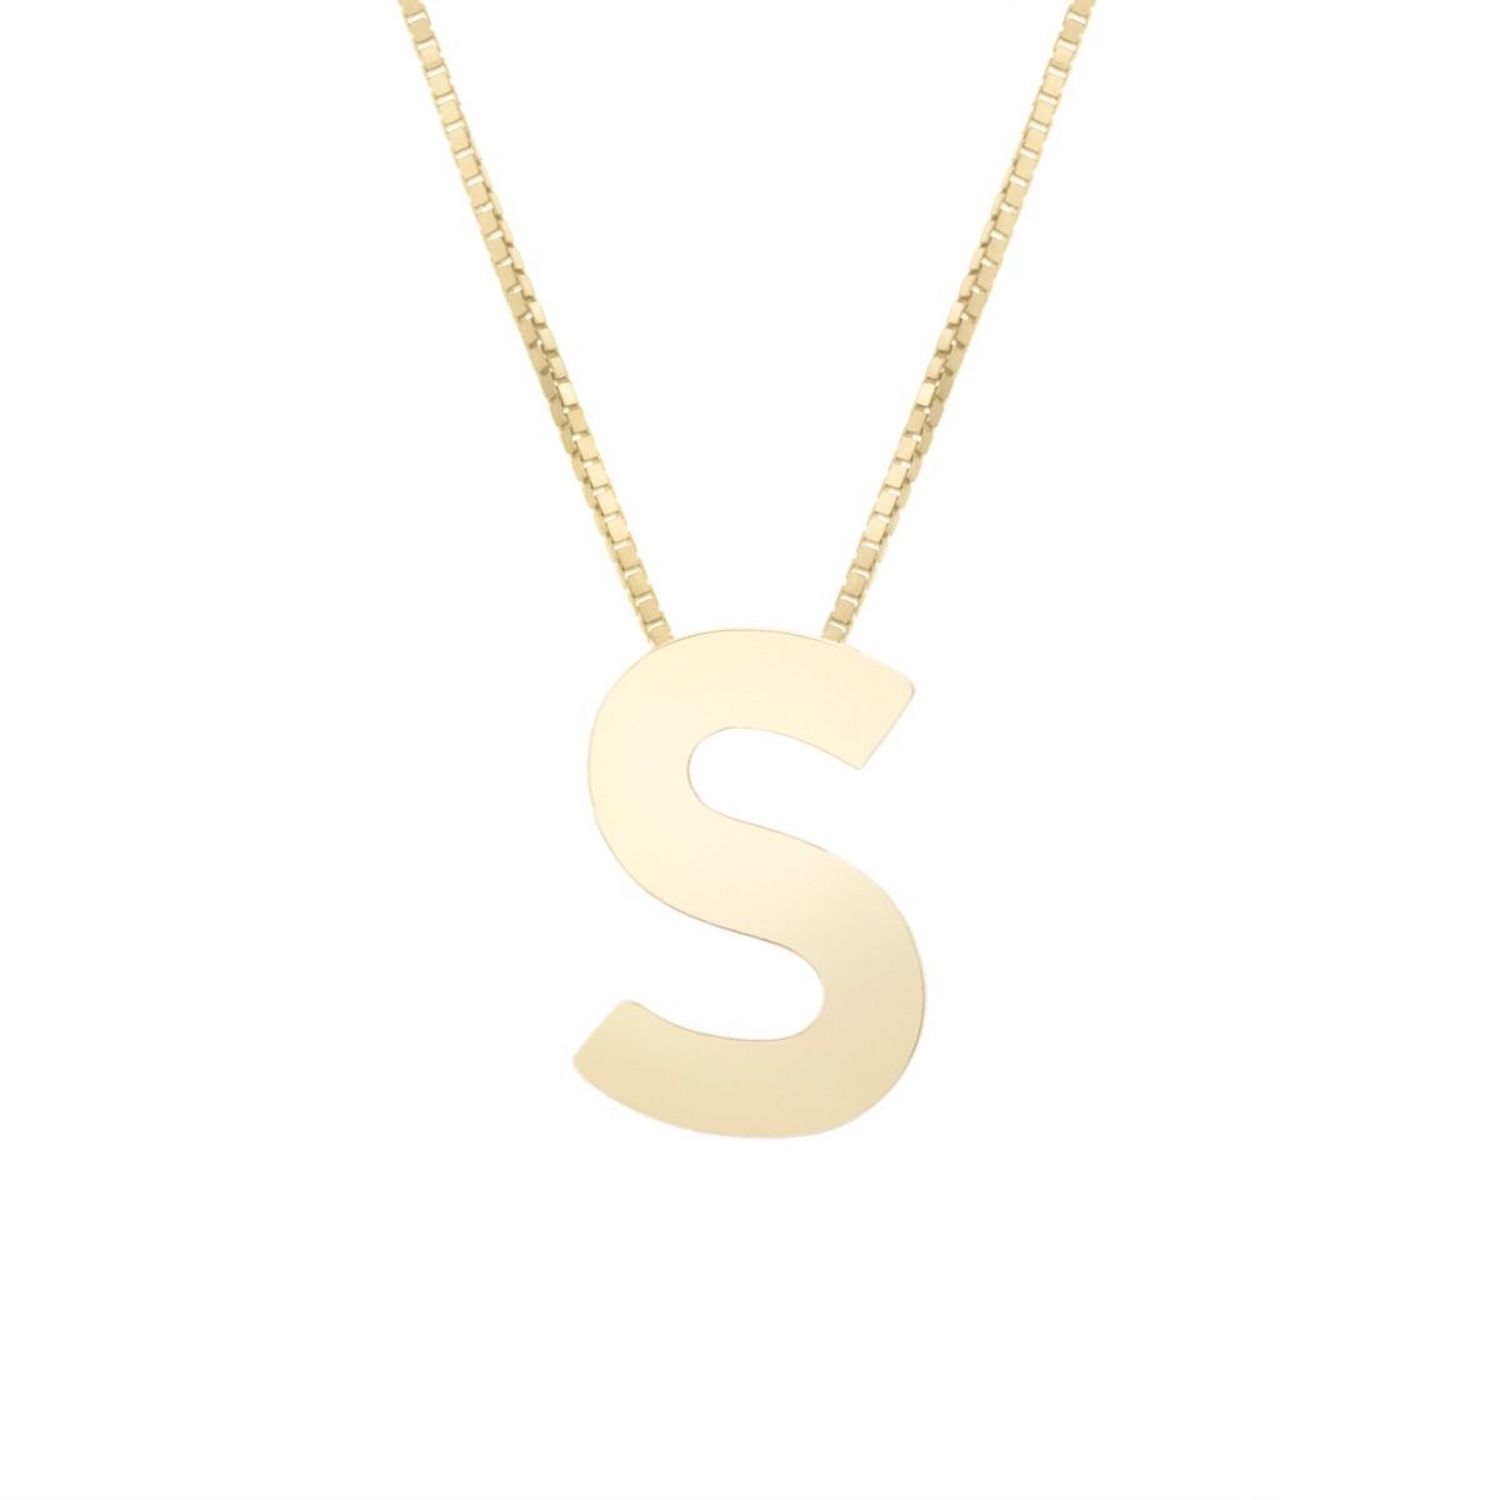 14K Yellow Gold Block Letter Initial Pendant Box Chain Necklace 16"-18" - S